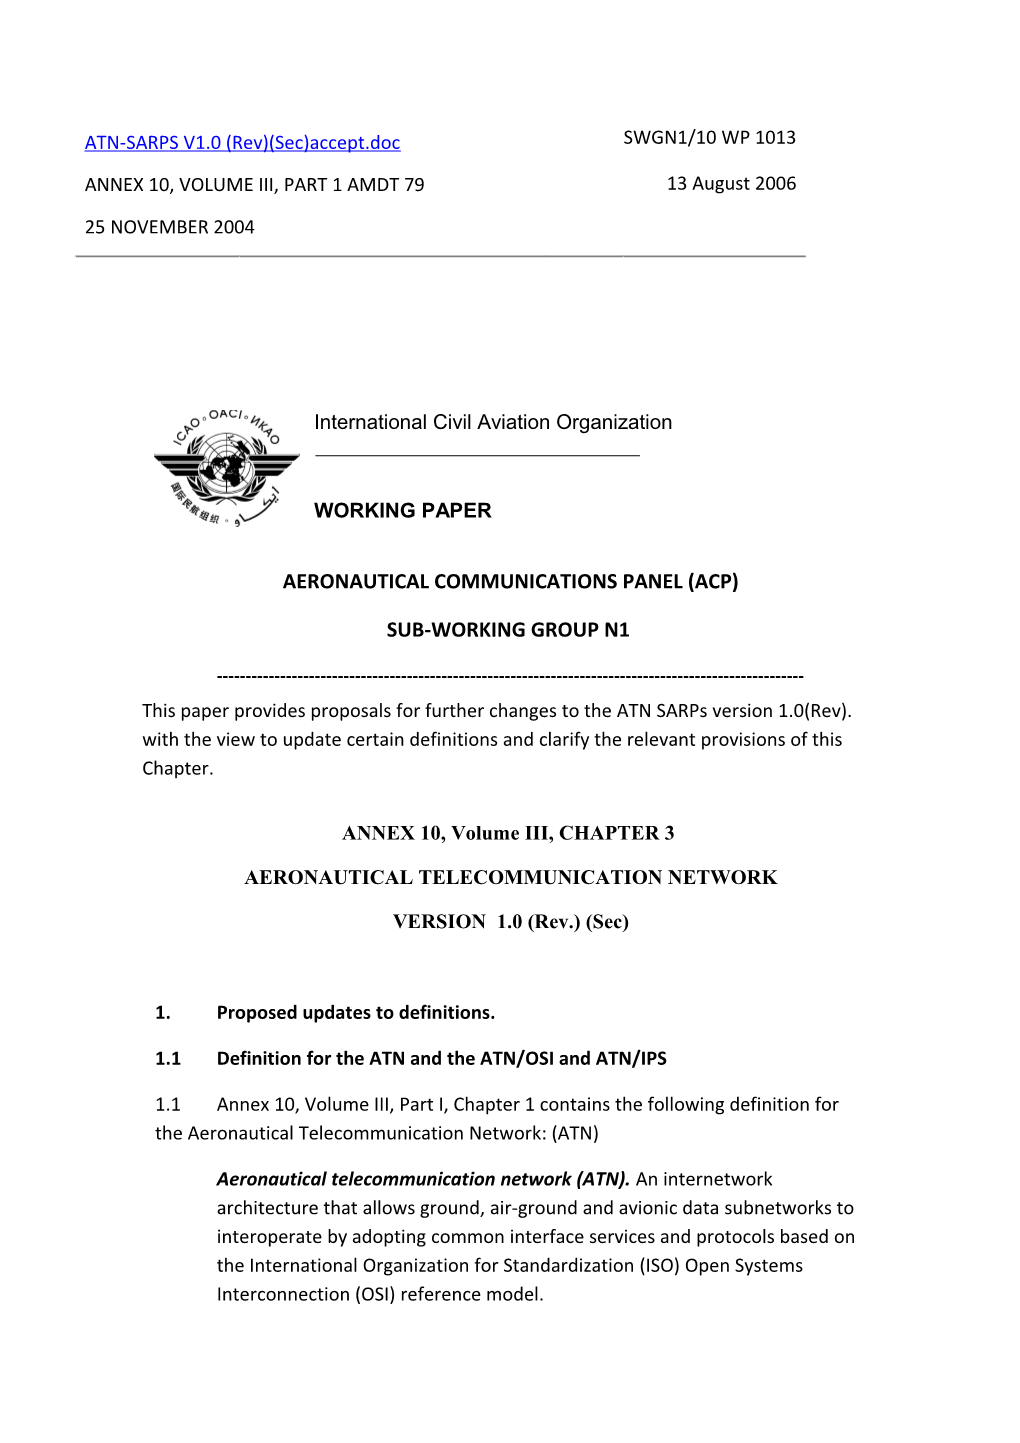 Proposal for Further Amendments to ATN Sarps